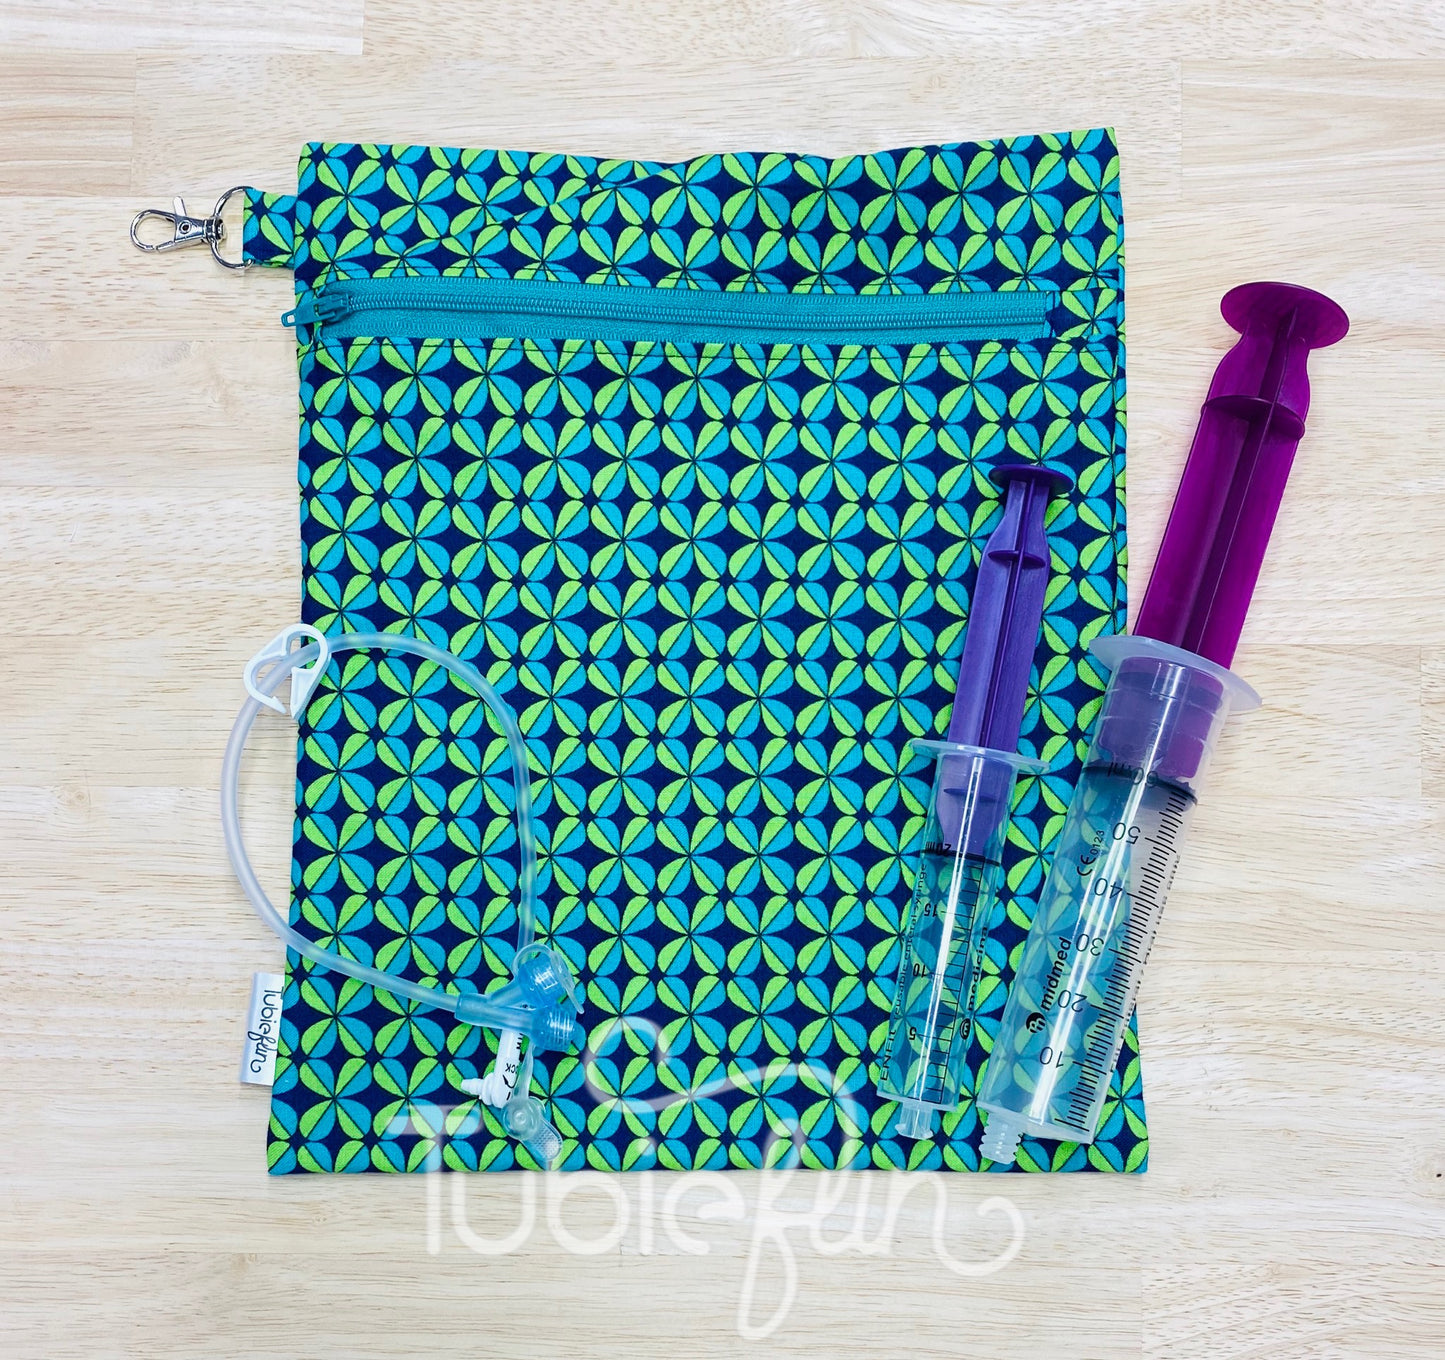 Syringe Bag in Large - Blue and Green Flowers